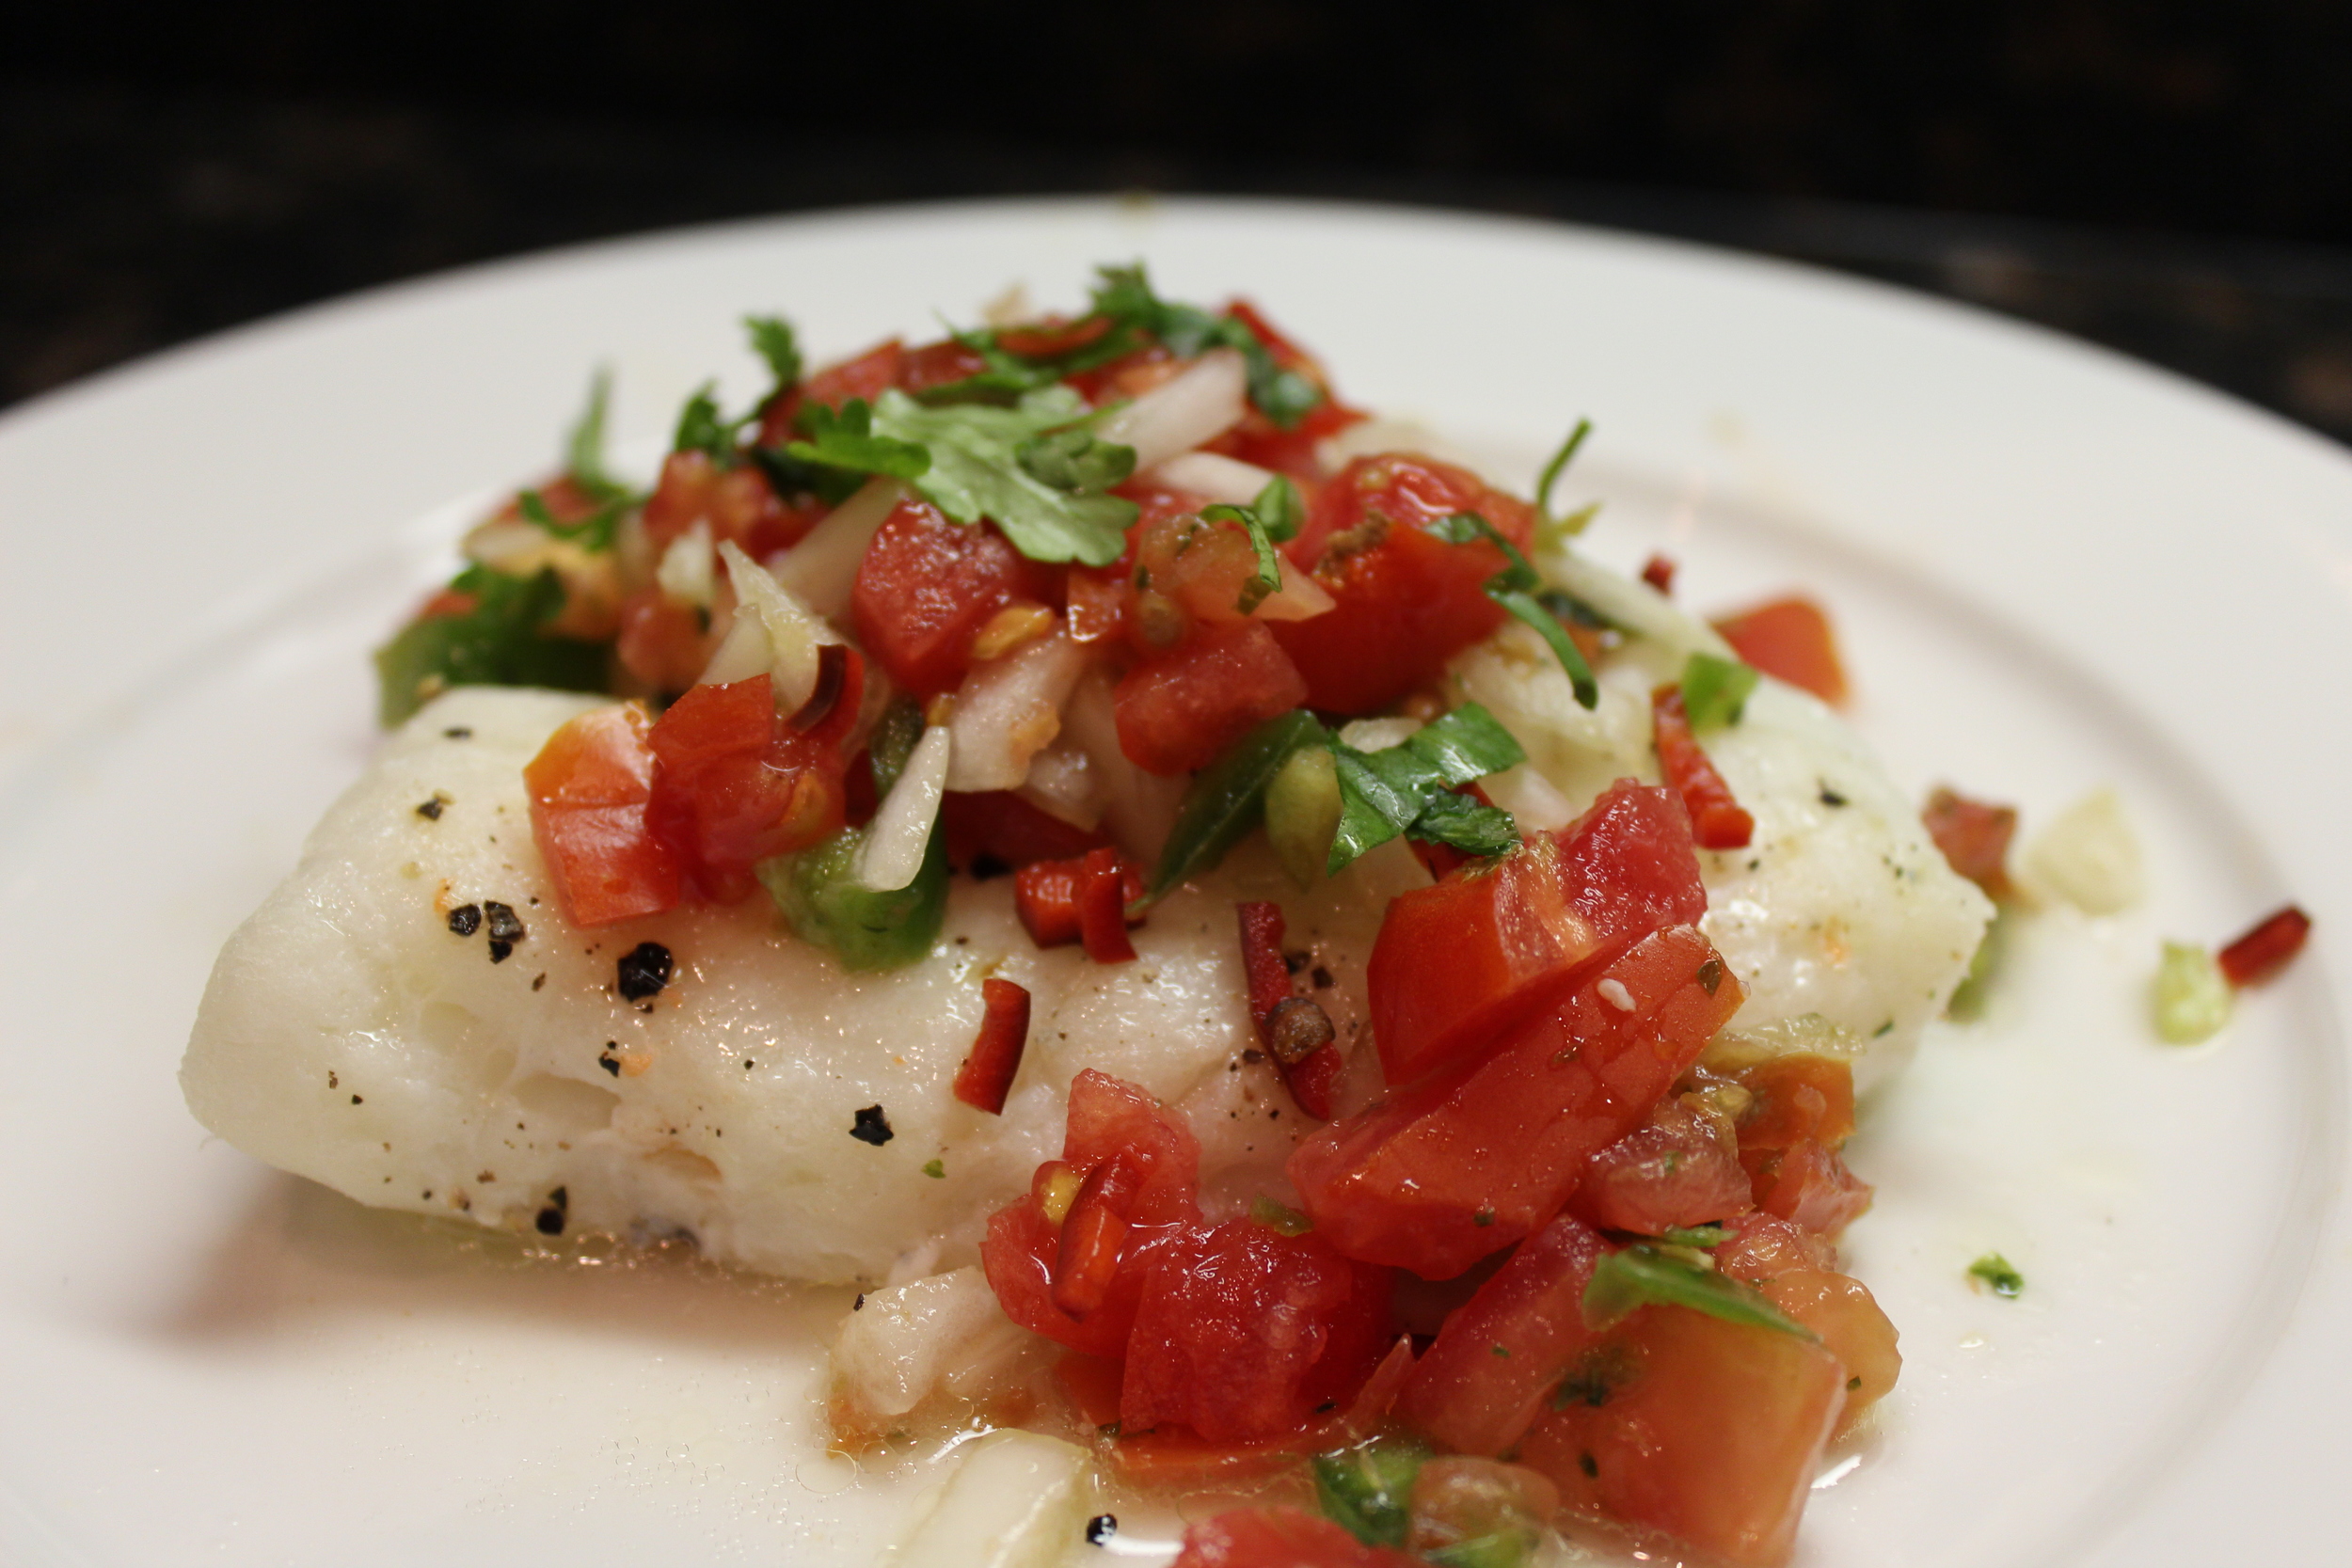 Slow-roasted cod with garden salsa